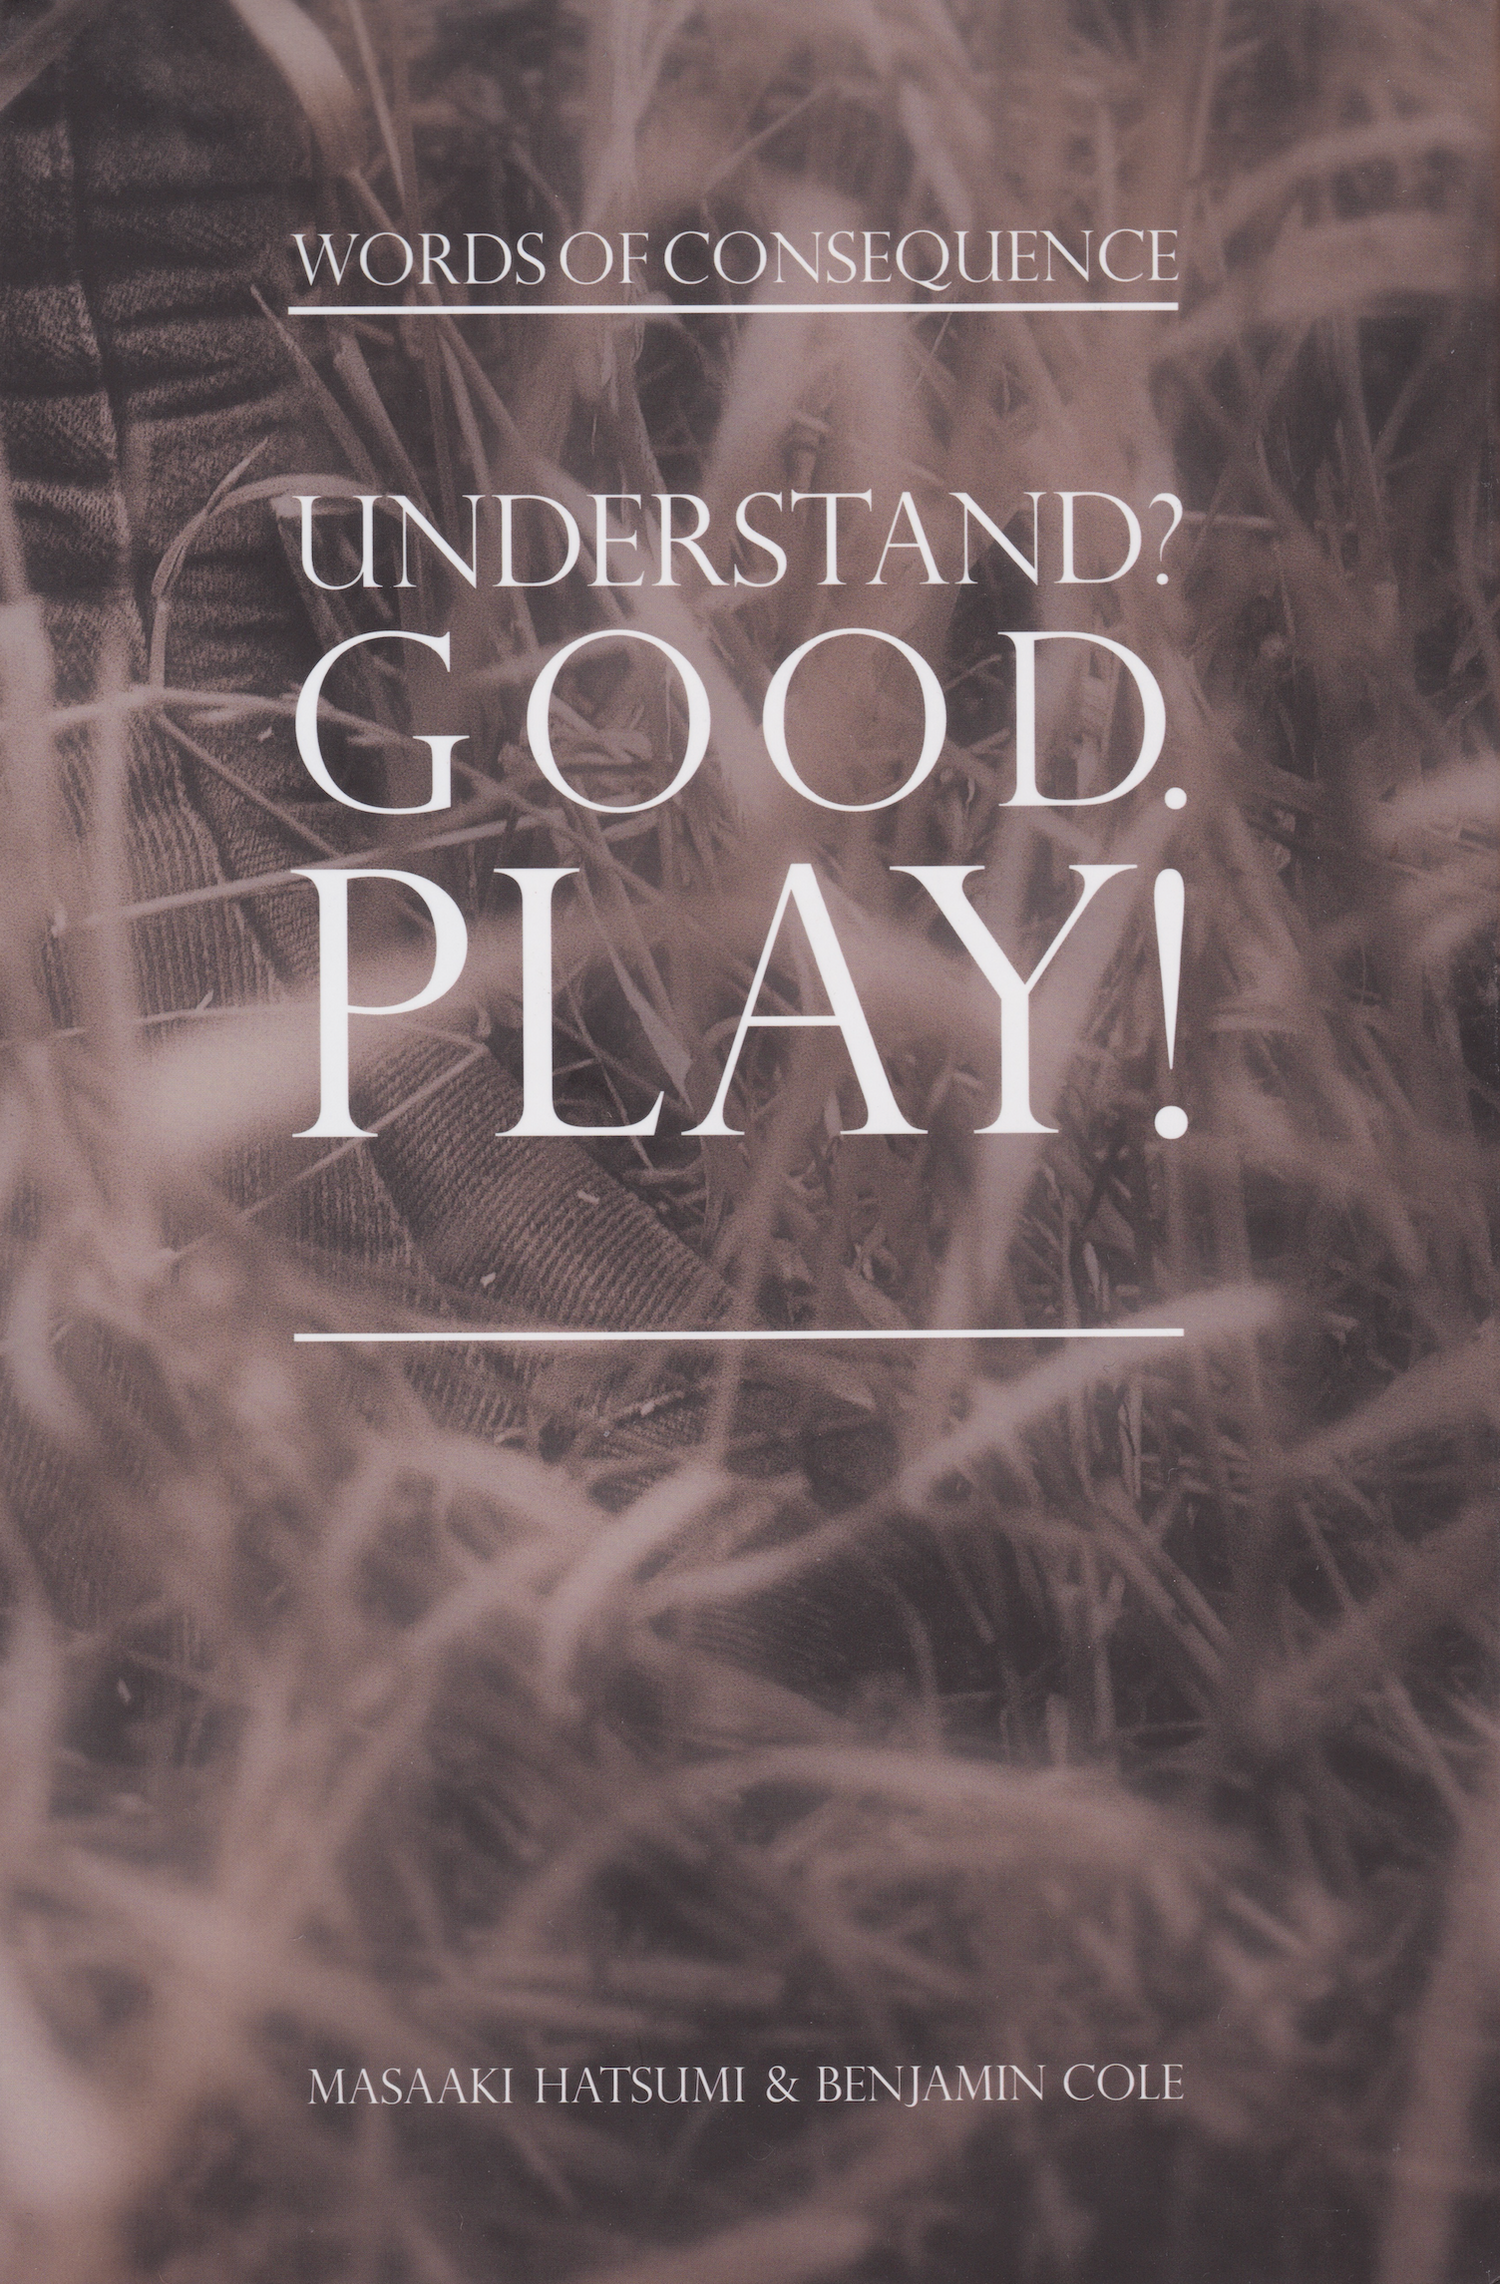 Understand? Good. Play! Words of Consequence Book by Masaaki Hatsumi & Benjamin Cole (Hardcover)